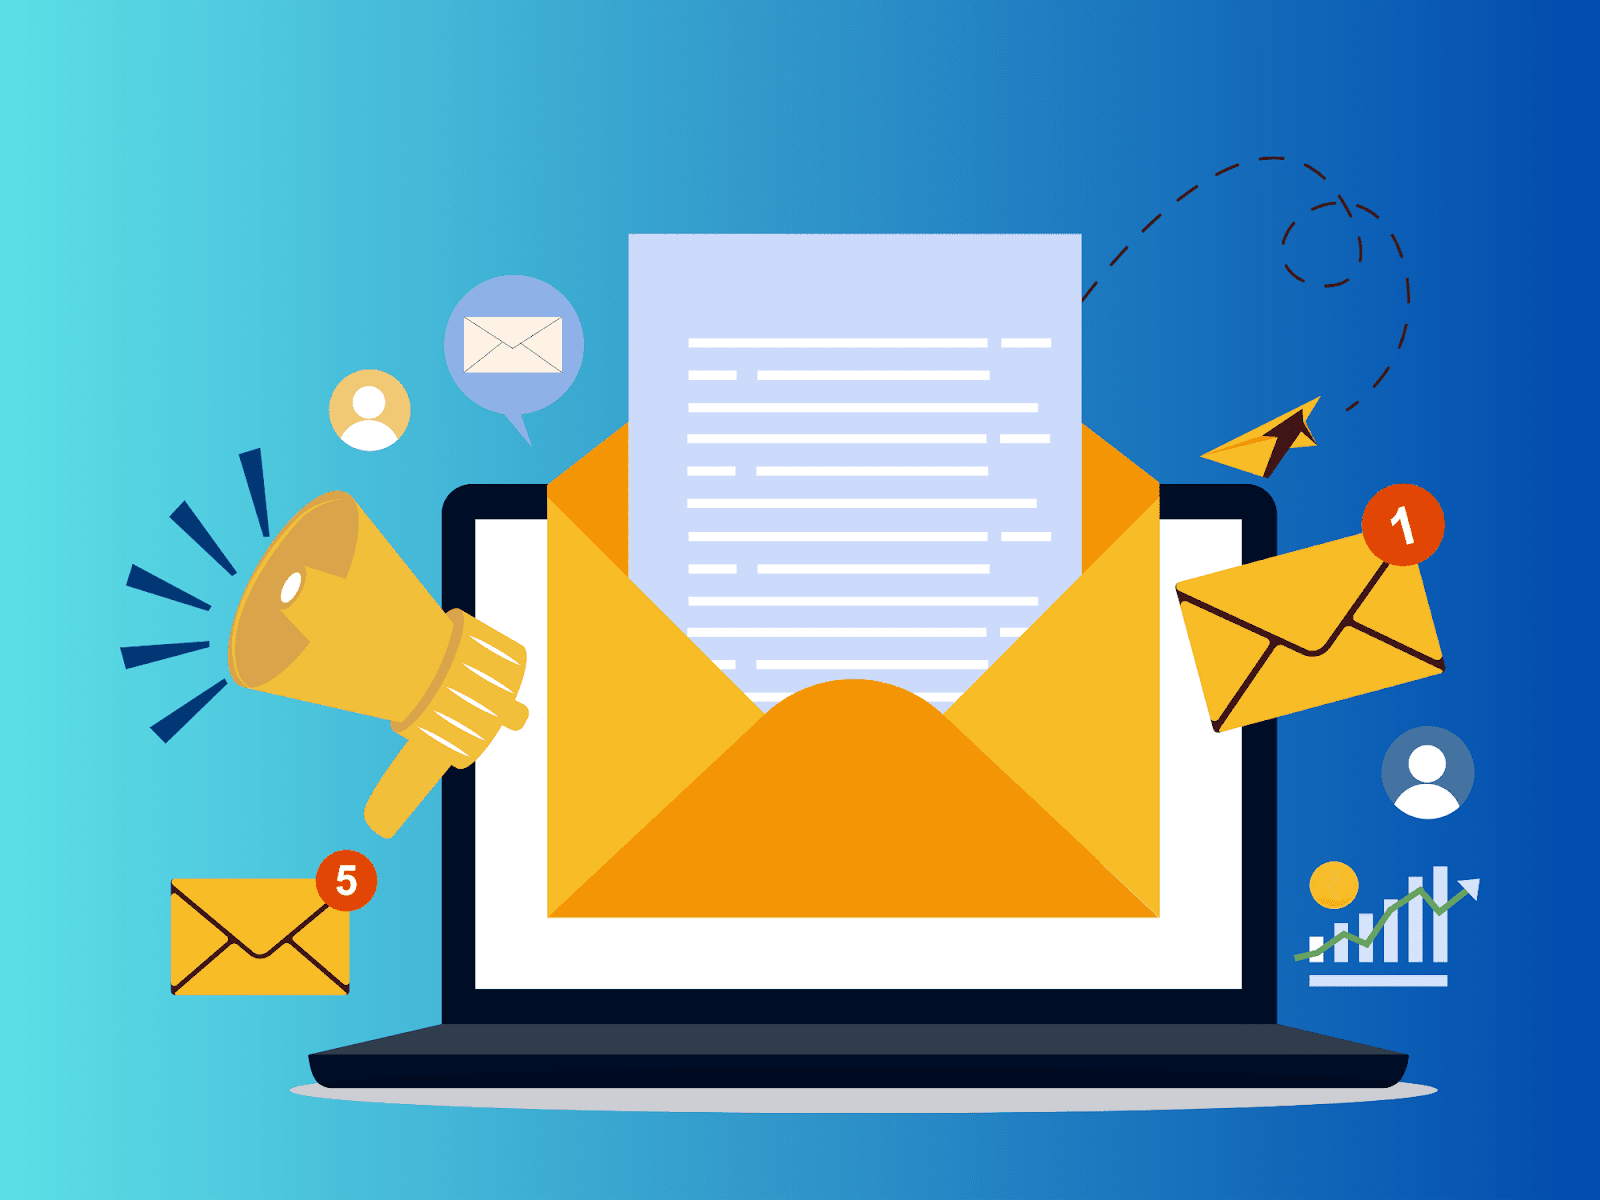 email marketing for personalized targeting to improve your ecommerce CRO